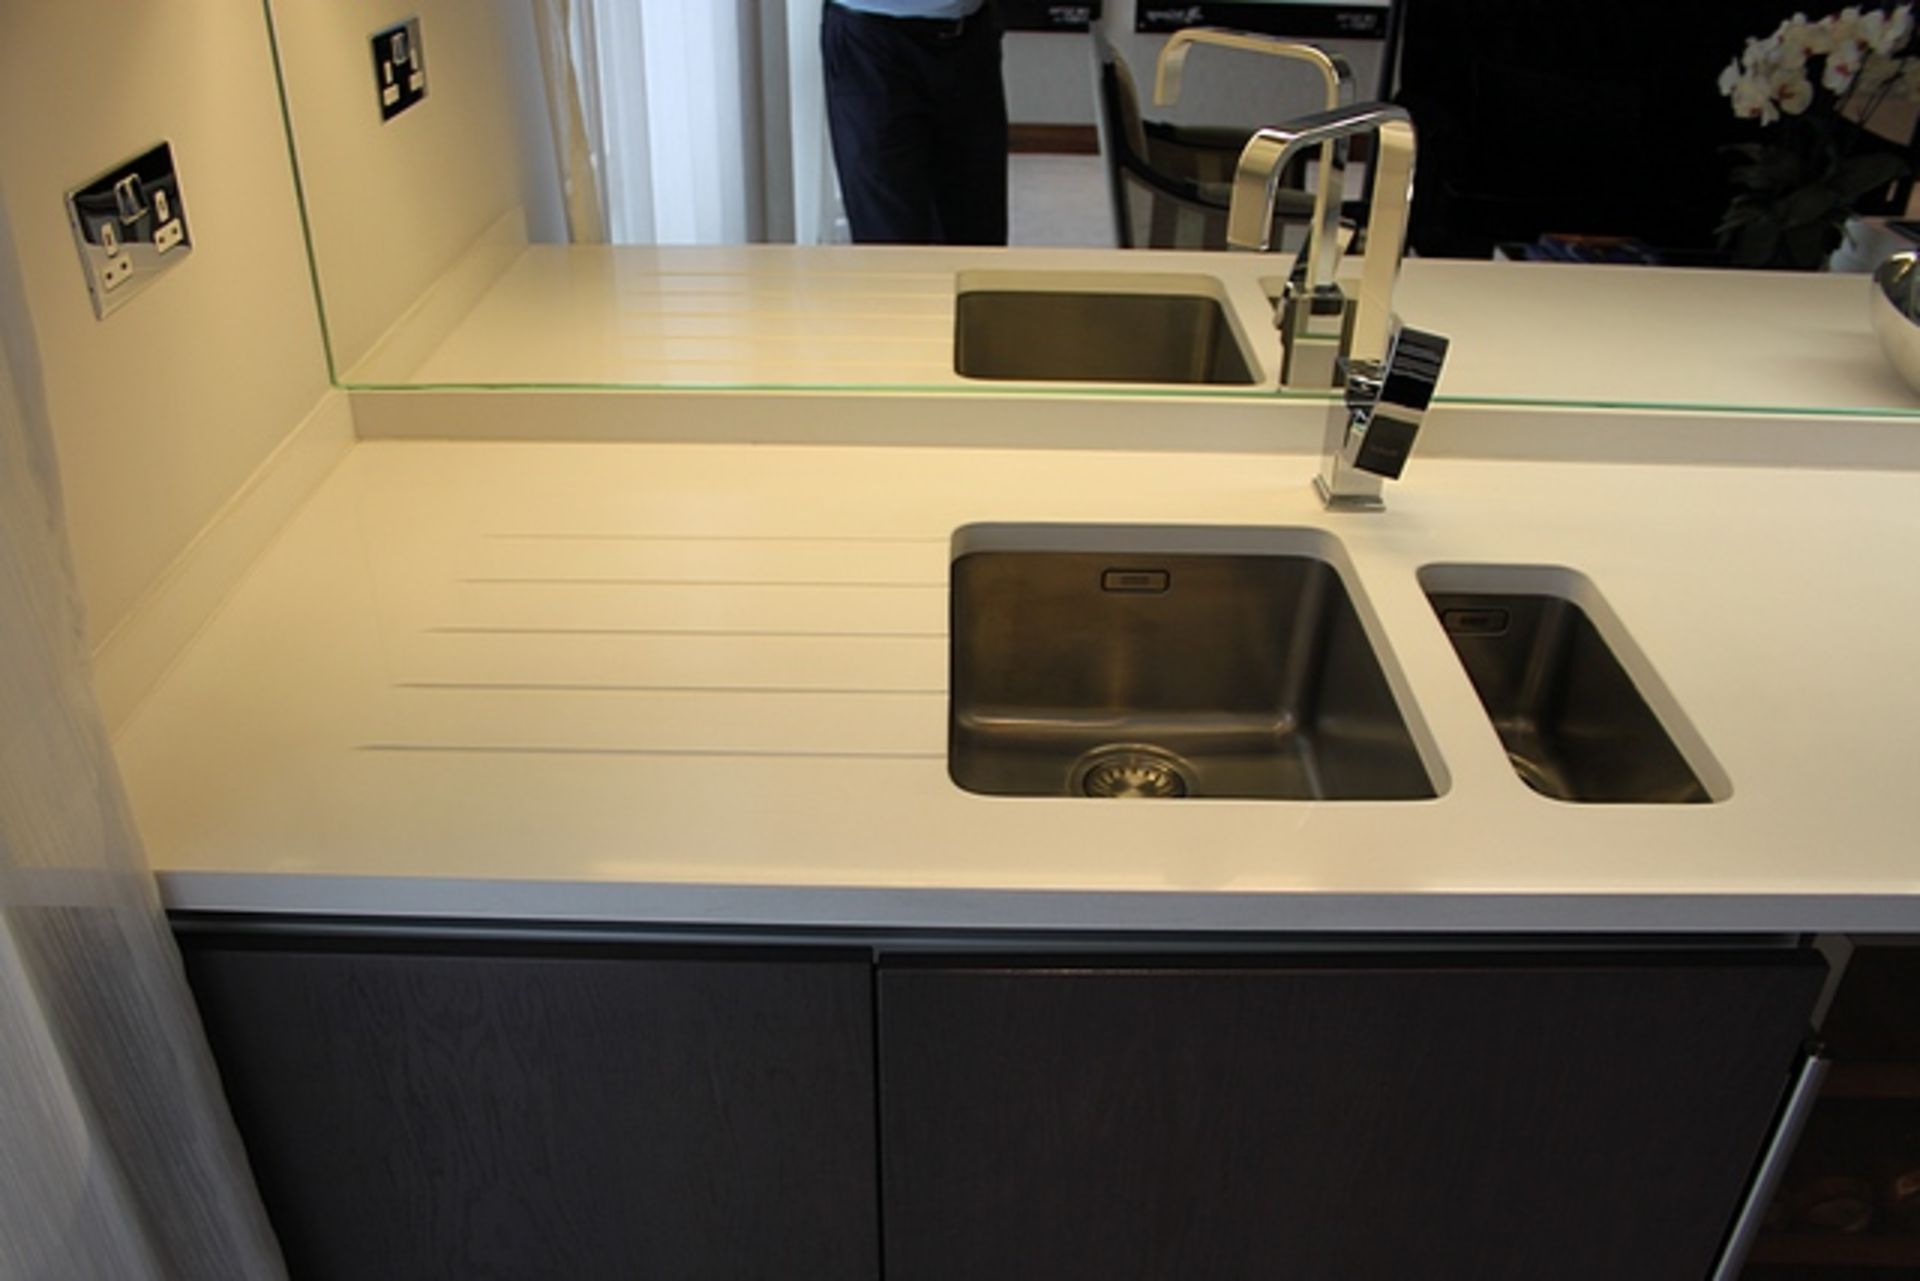 Stone worktop counter surface with integral stainless basin and mixer tap 2940mm x 630mm complete - Image 3 of 5